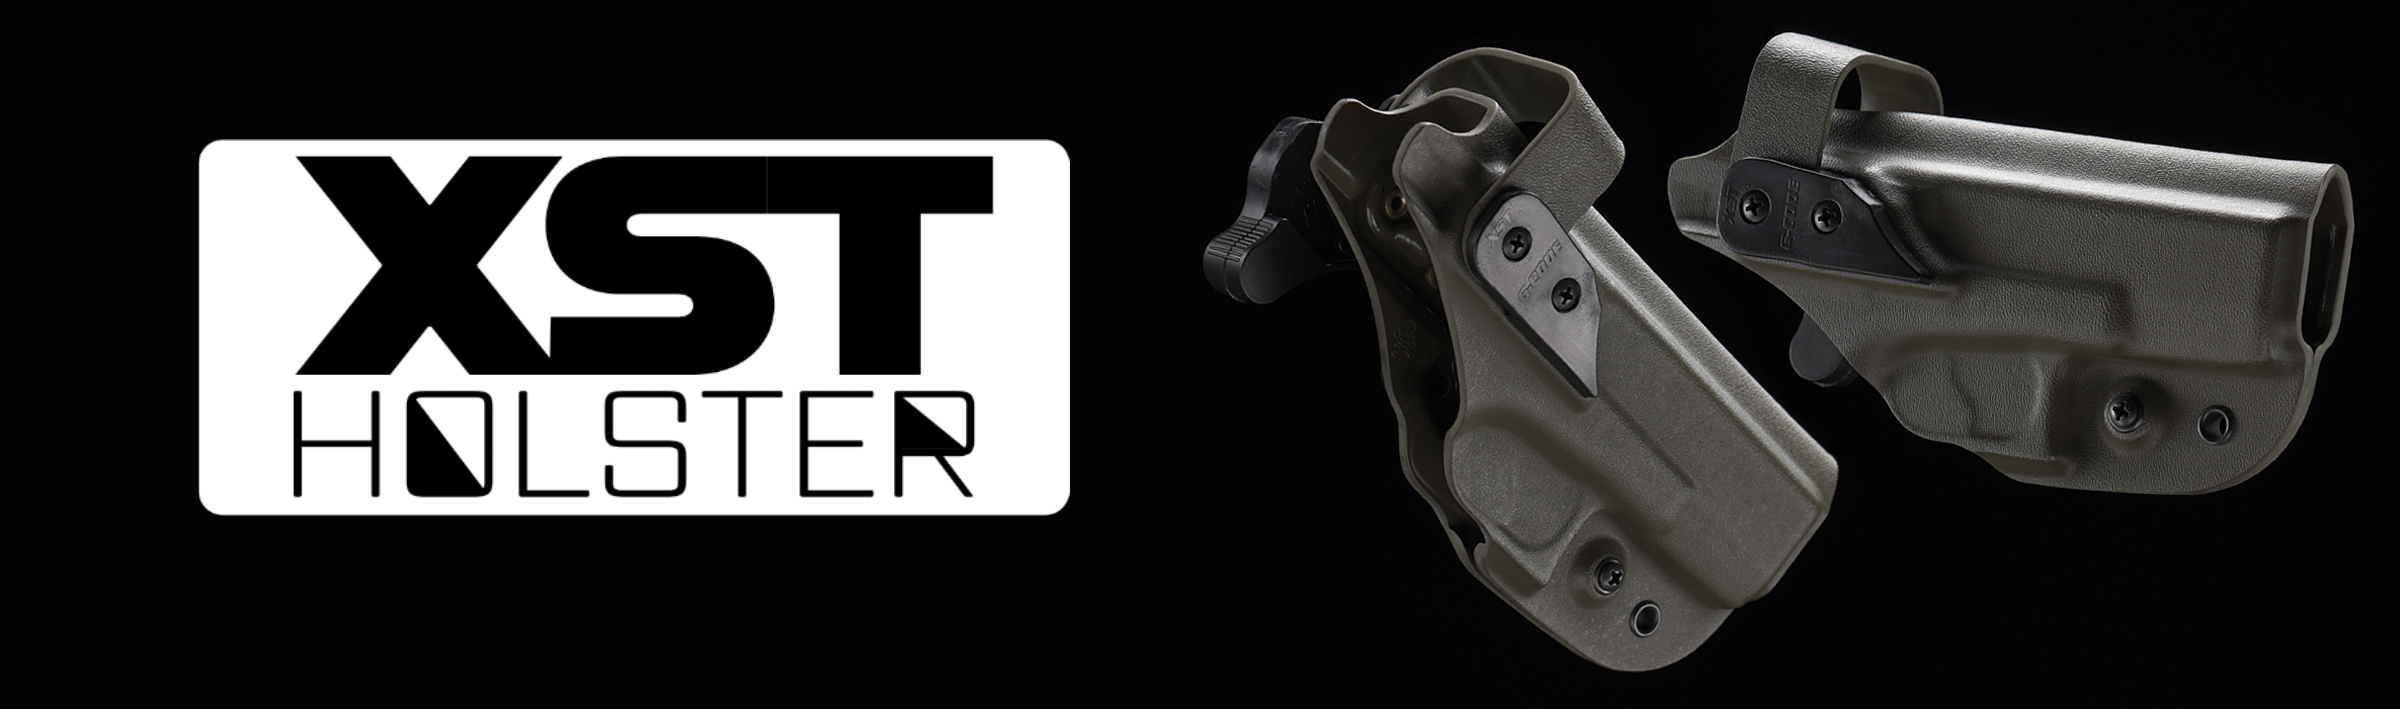 XST holster - tactical holsters and equipment